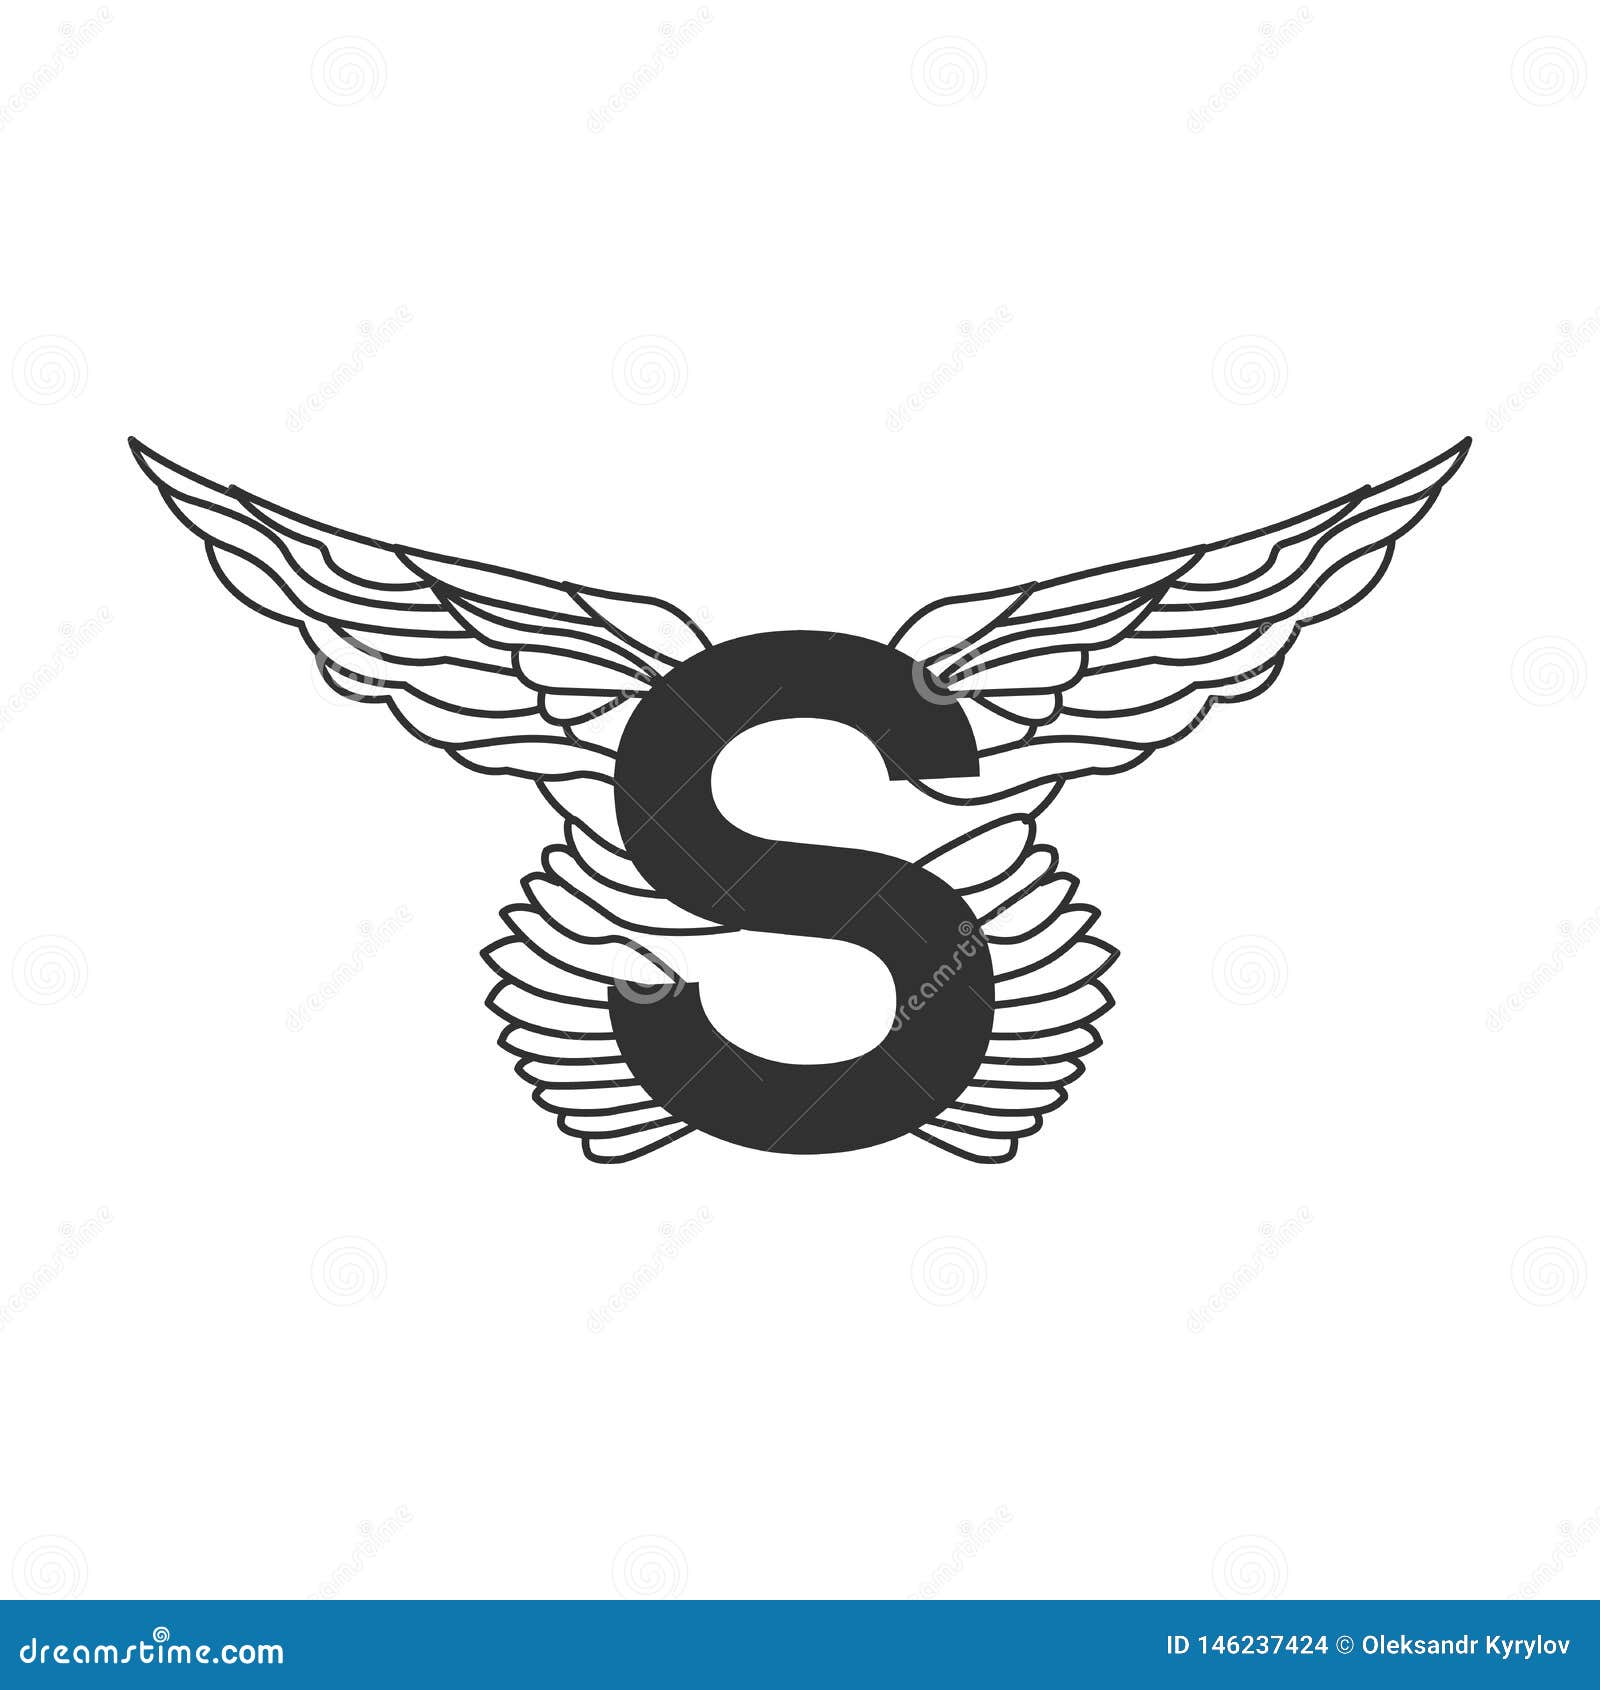 Tattoo of the letter S located on the tricep